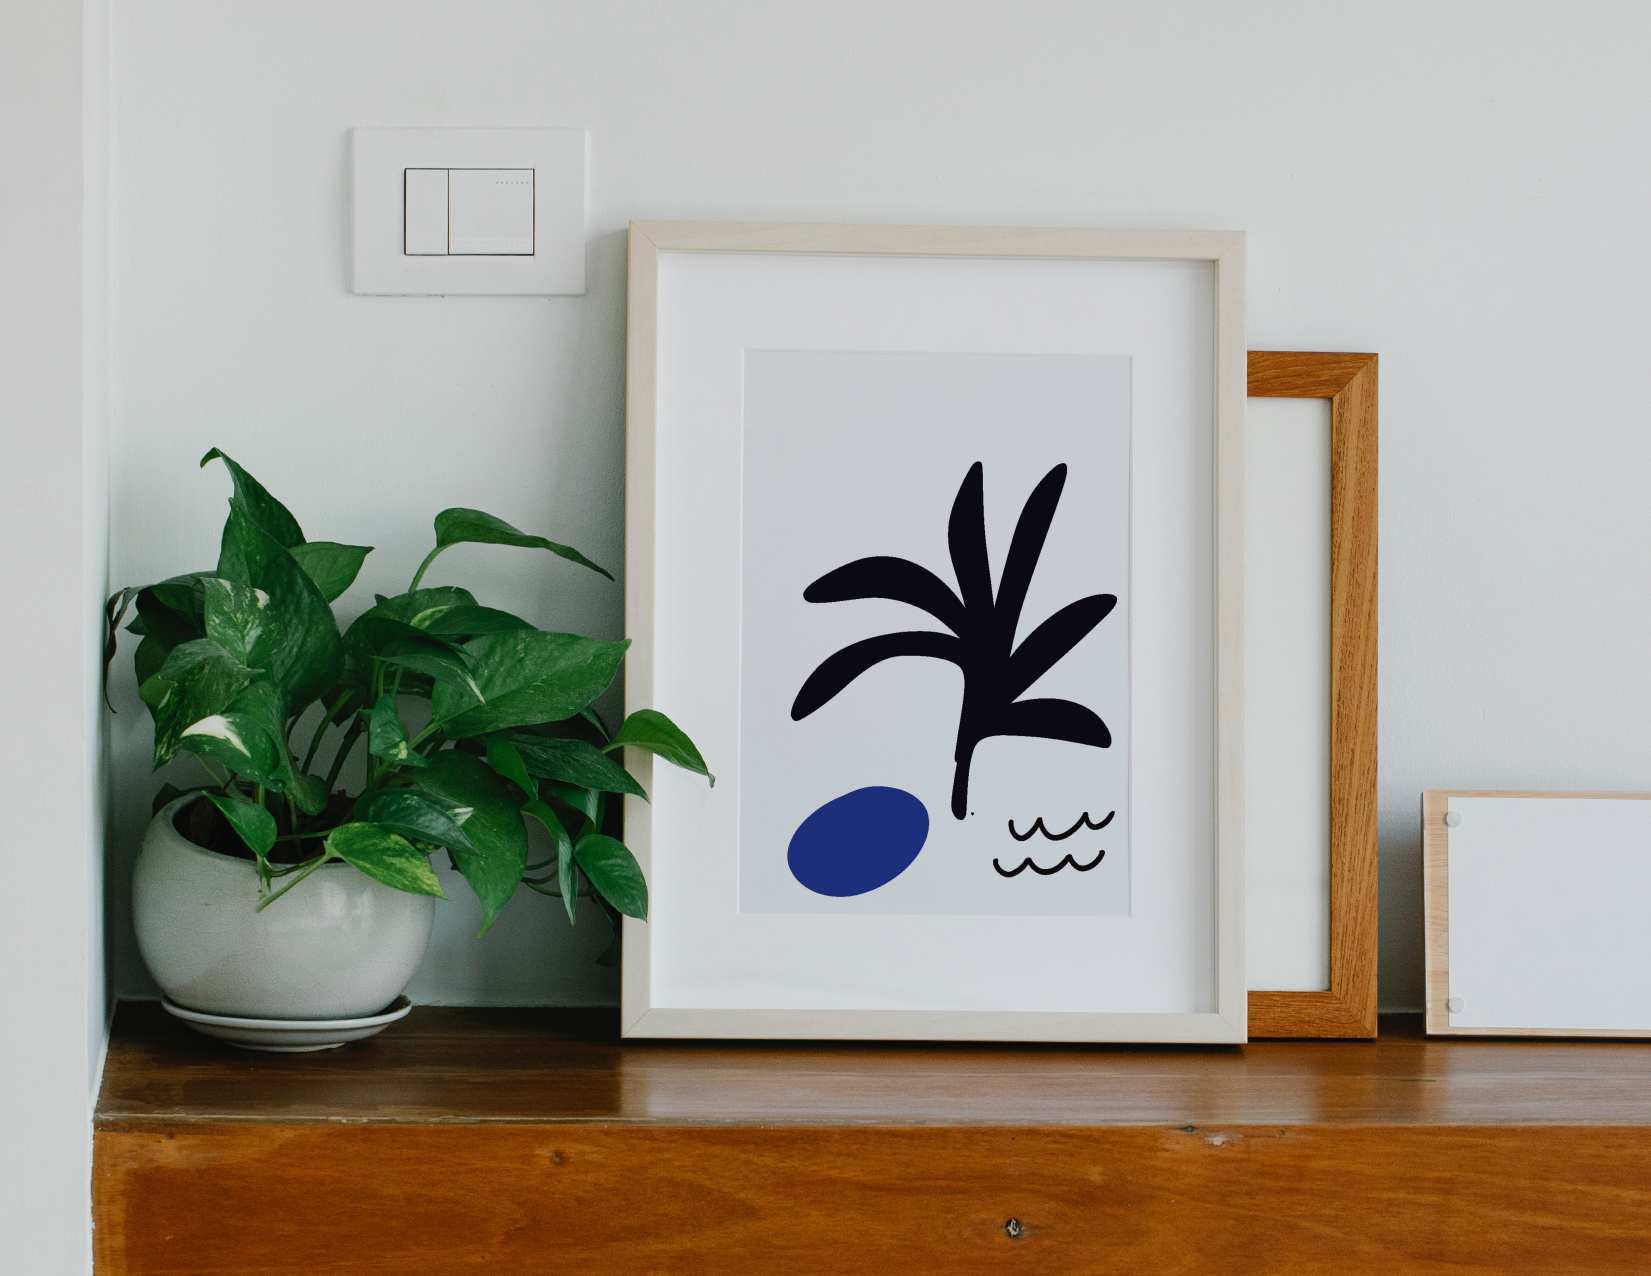 Summer Series No. 18 - Art Prints by Tippy Tippens